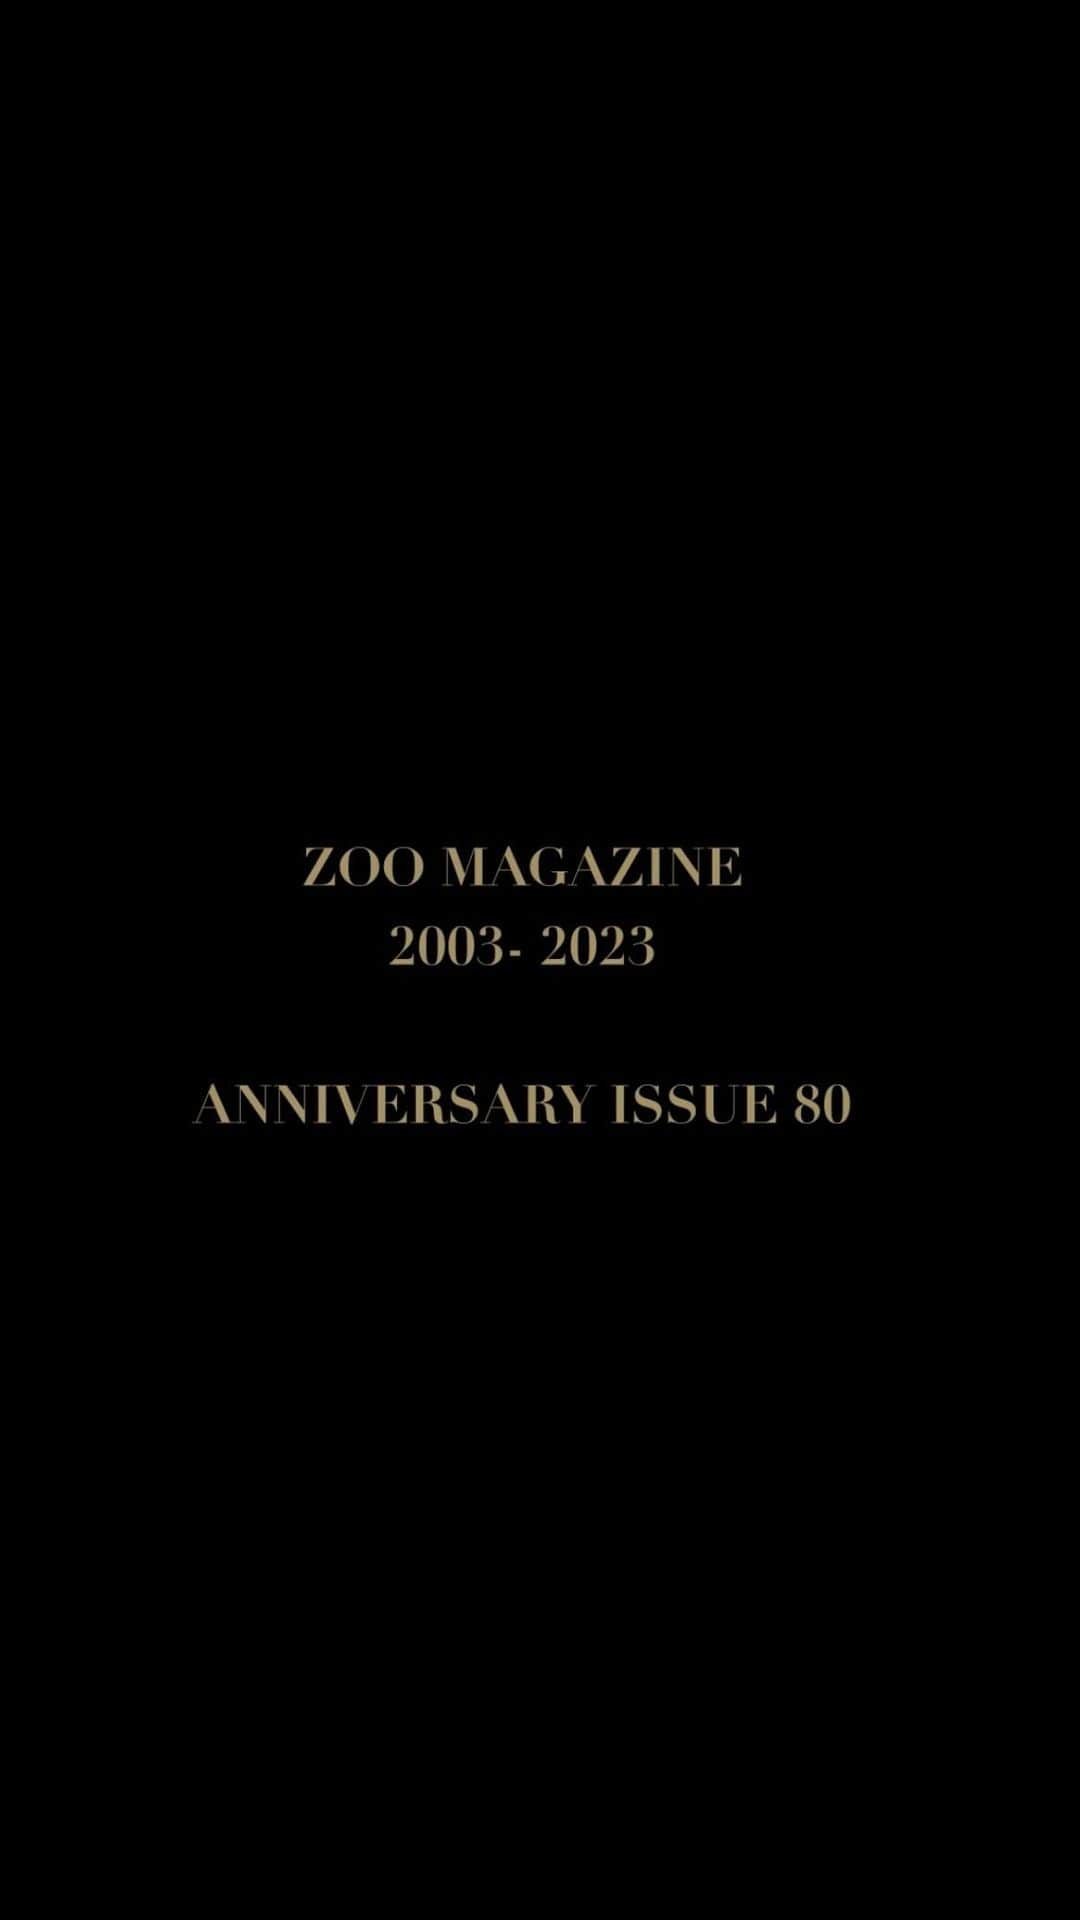 ZOO Magazineのインスタグラム：「A warm celebration of 20 YEARS ZOO MAGAZINE in Berlin last Month and celebrating Anniversary Issue 80  In 2003, Berlin Mitte became the birthplace of ZOO magazine. Believing in the creative potential of the German-speaking realm, Editor-in-Chief Sandor Lubbe and his team launched the magazine in the DACH region.  During the last 20 years, the platform was able to show developments in cinema, fashion, architecture and design through the lens of various talents by providing a unique platform.  We are eternally grateful to everybody who has contributed to ZOO as a melting pot for ideas.  Between the dinner courses, the guests enjoyed musical accompaniment performed by a Swing Band, which rendered Clärchens Ballhaus all the more characteristic. After dinner, the evening culminated with an exclusive performance by Sven Ratzke and piano played by Jetse de Jong.  Film by Clemens Stumpf & Niclas Hille  Music by Sven Ratzke & Jetse de Jong  Thank you to all the lovely guests who joined us and also to:  Clarchen Ballhaus Ruinart Moonarij Objects Berlin & Anatomie Fleur Berlin Atelier Oblique Berlin 4x50  #zoomagazine #berlin #zoomagazineanniversaryissue80 #zoomagazine20years #zoomagazineanniversary #sandorlubbe #zoomagazineberlin #zoo #zooberlin #event #zooevent #clarchenballhaus @aaronaltaras @benvonmartens @bennyoarthur @bettina.berlin @boriskralj @carocult @chriseeh @danielstraesser @eliasasbai @ericasamoahstudio @franziskahanusek @gina.stiebitz @hannahherzsprung @hans_laurin @huelya_akin @igorandjelic @lenaluks @inkastelljes @jannik.schuemann @felixkruck @_jasmintaylor_ @samuraimuseumberlin @janssen3042 @jonasburgertofficial @janbecker_hypnose @katharina_schuettler @kjellbrutscheidt @langstonuibel @leanderweidl @lenaklenke  @liliepply @louishofmann @martinederatelier @marykomasa @meret.becker @miron_zownir @moritzjahnofficial @nadinewarmuth @odajaune @peribaumeister  @phelineroggan_official @philippegerlach @philippverheyen @sarahlfalk @stellamarkert @svenmarquardt @svenratzke @theaehre @zsazsainci @johanna_silbermann @theuerkorn @willywonkaweinhaus @estherperbandt  @emmadrogunova @vanessa_loibl @rick.okon @lulusnunitamanita @maxiimilianes #carolinhenk」